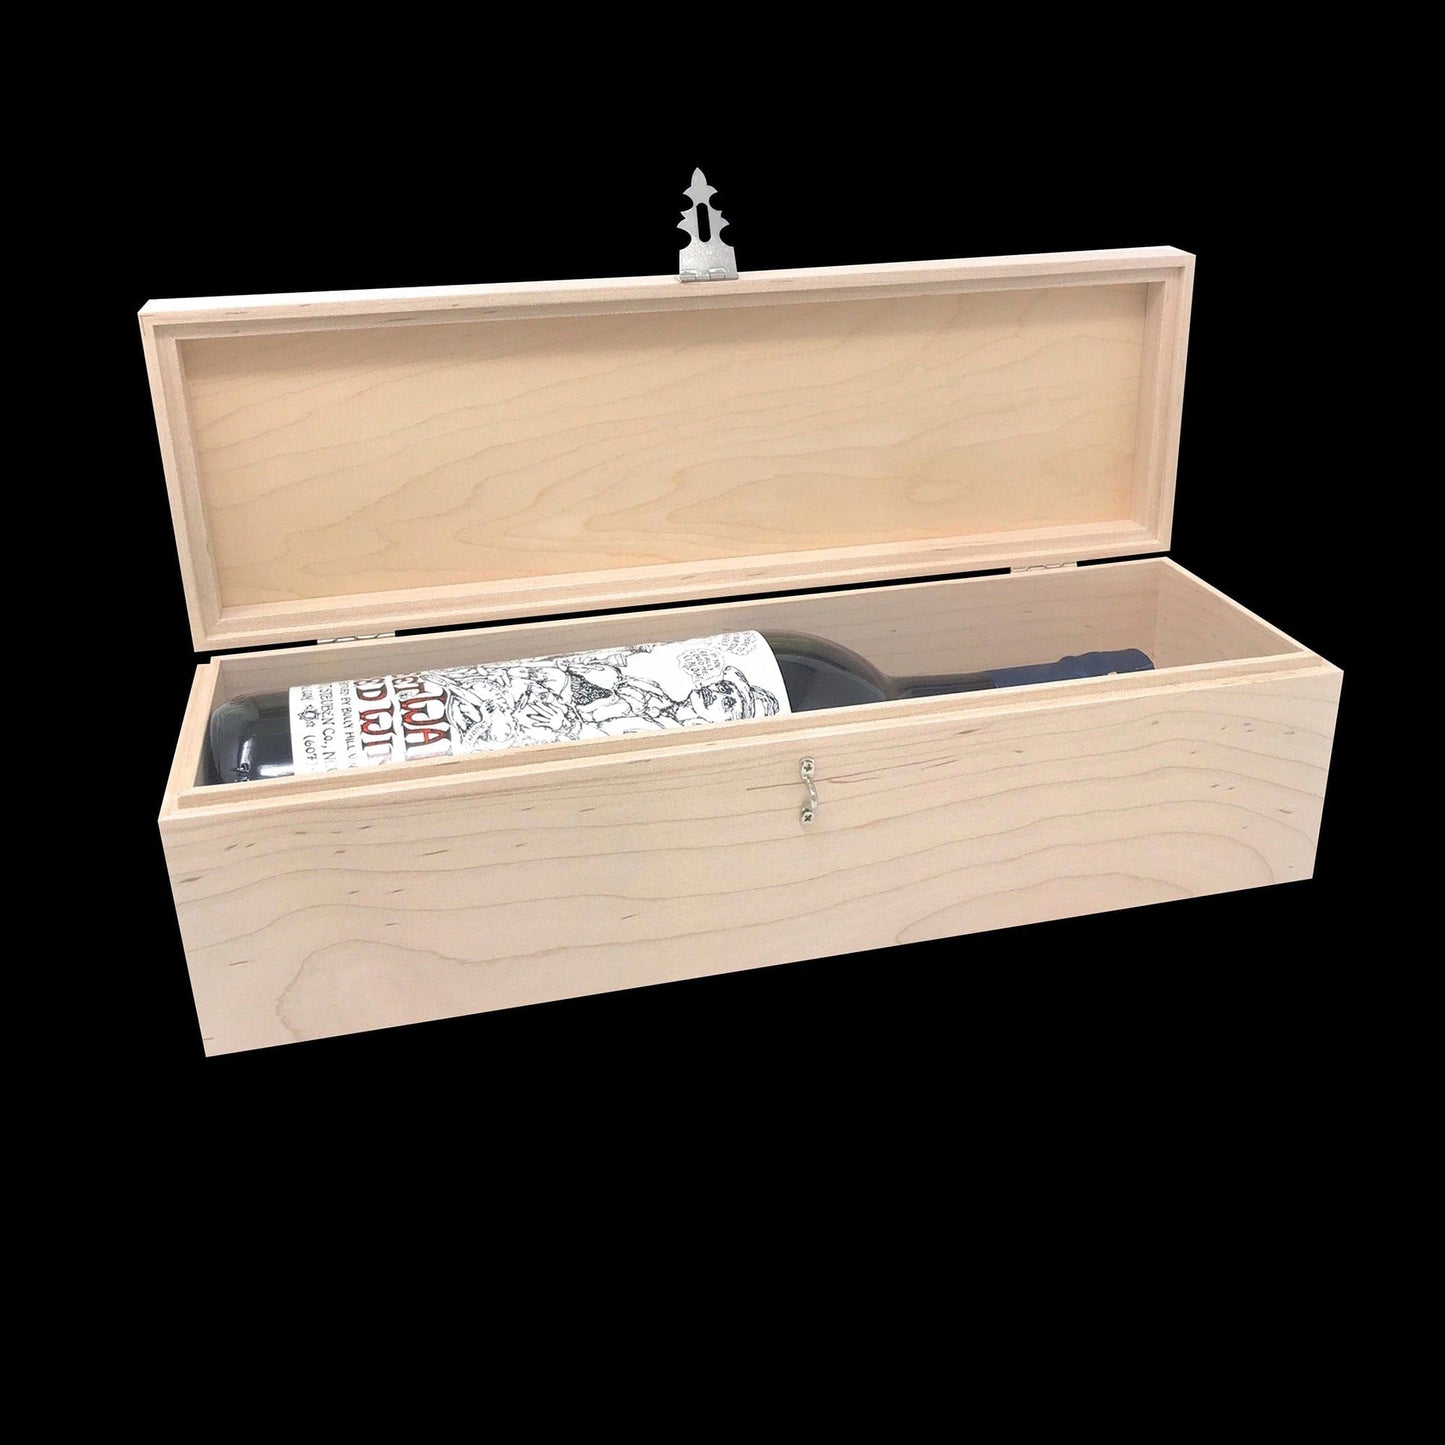 The Designcraft Studio Maple / Gold Unfinished Wooden Wine Box with Hinge and Lock 13 3/4 x 4 1/4 x 4 Personalized Laser Engraving Available